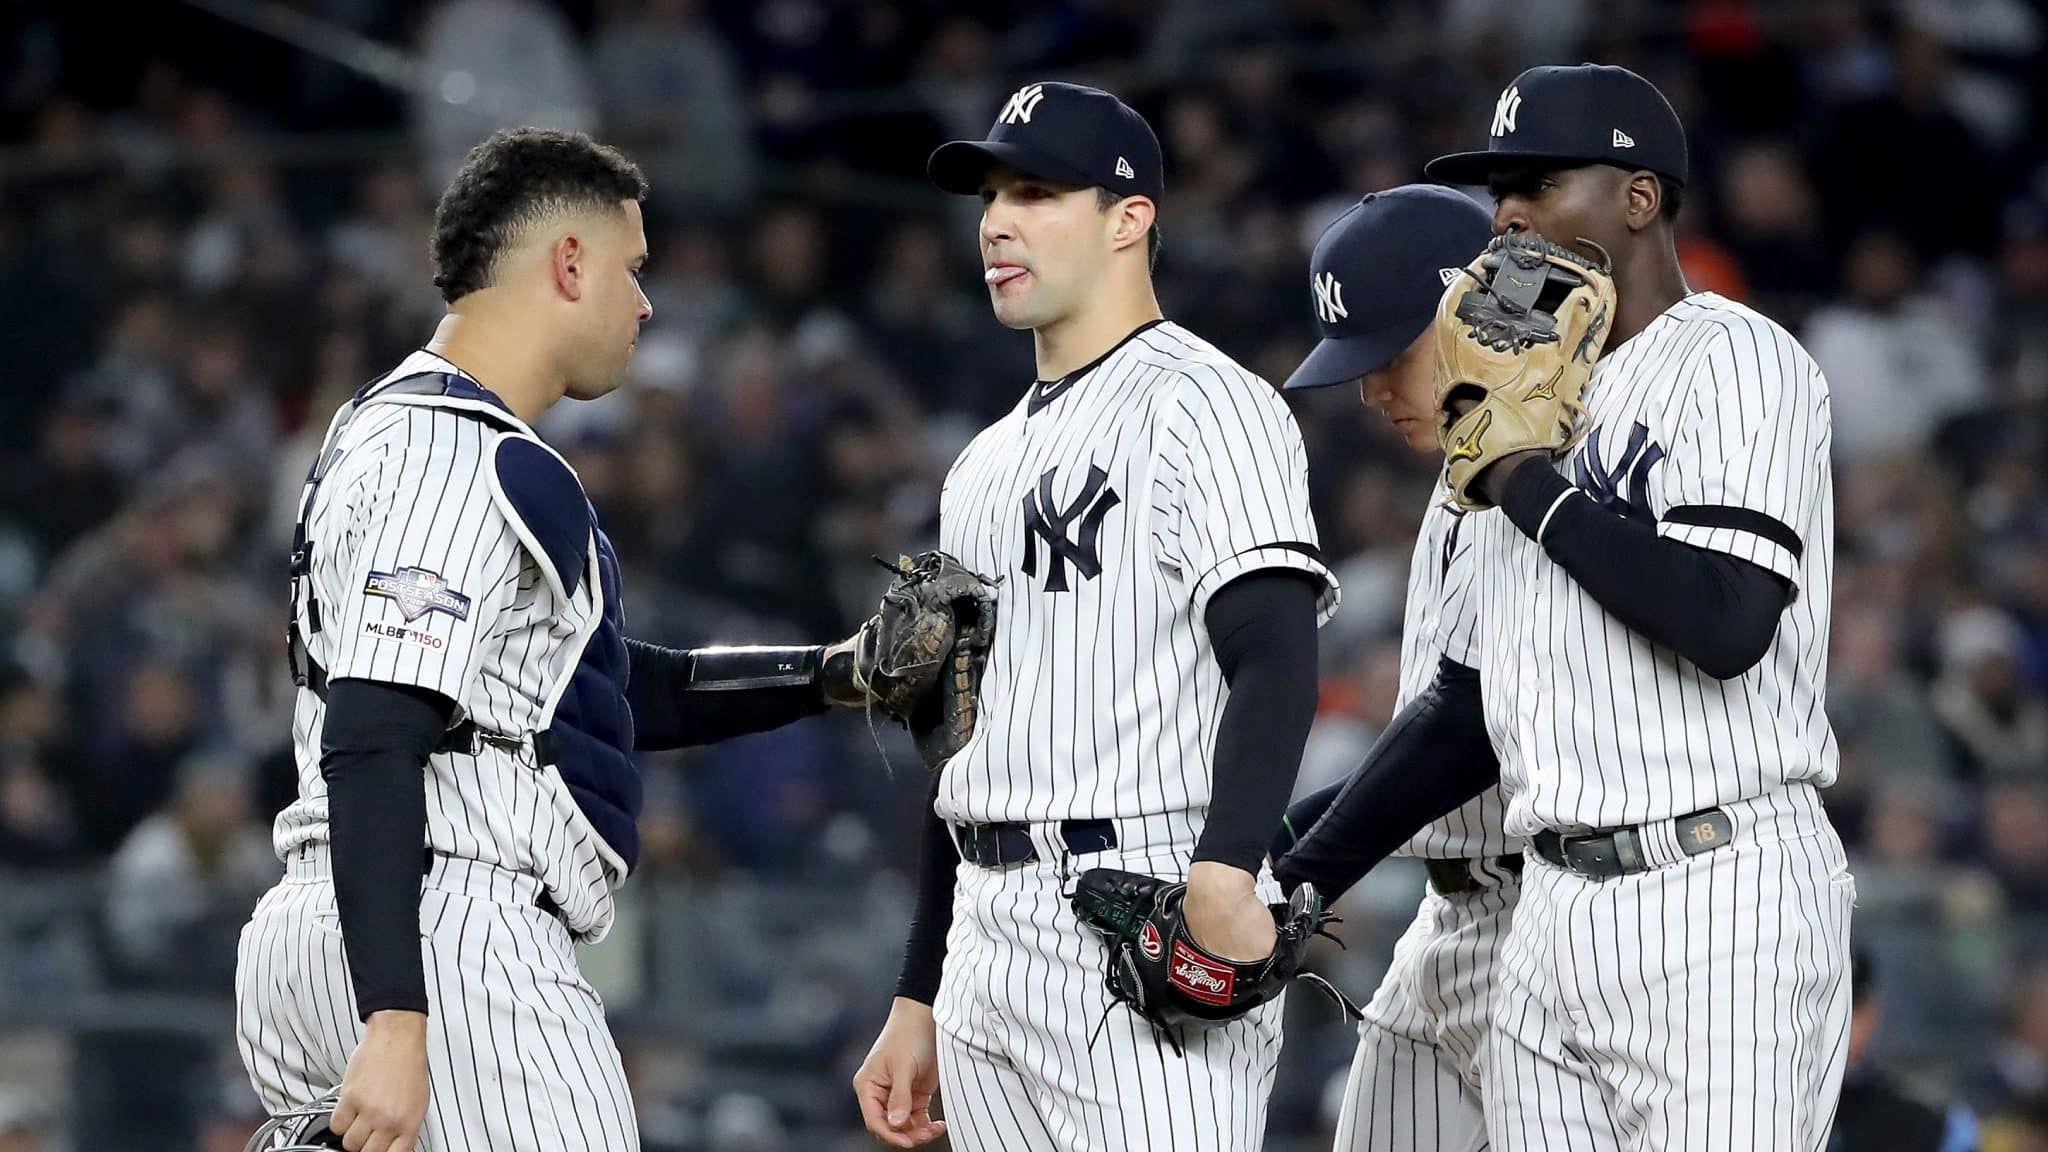 NEW YORK, NEW YORK - OCTOBER 18: Tommy Kahnle #48 of the New York Yankees talks with Gary Sanchez #24 and Didi Gregorius #18 against the Houston Astros during the seventh inning in game five of the American League Championship Series at Yankee Stadium on October 18, 2019 in New York City.